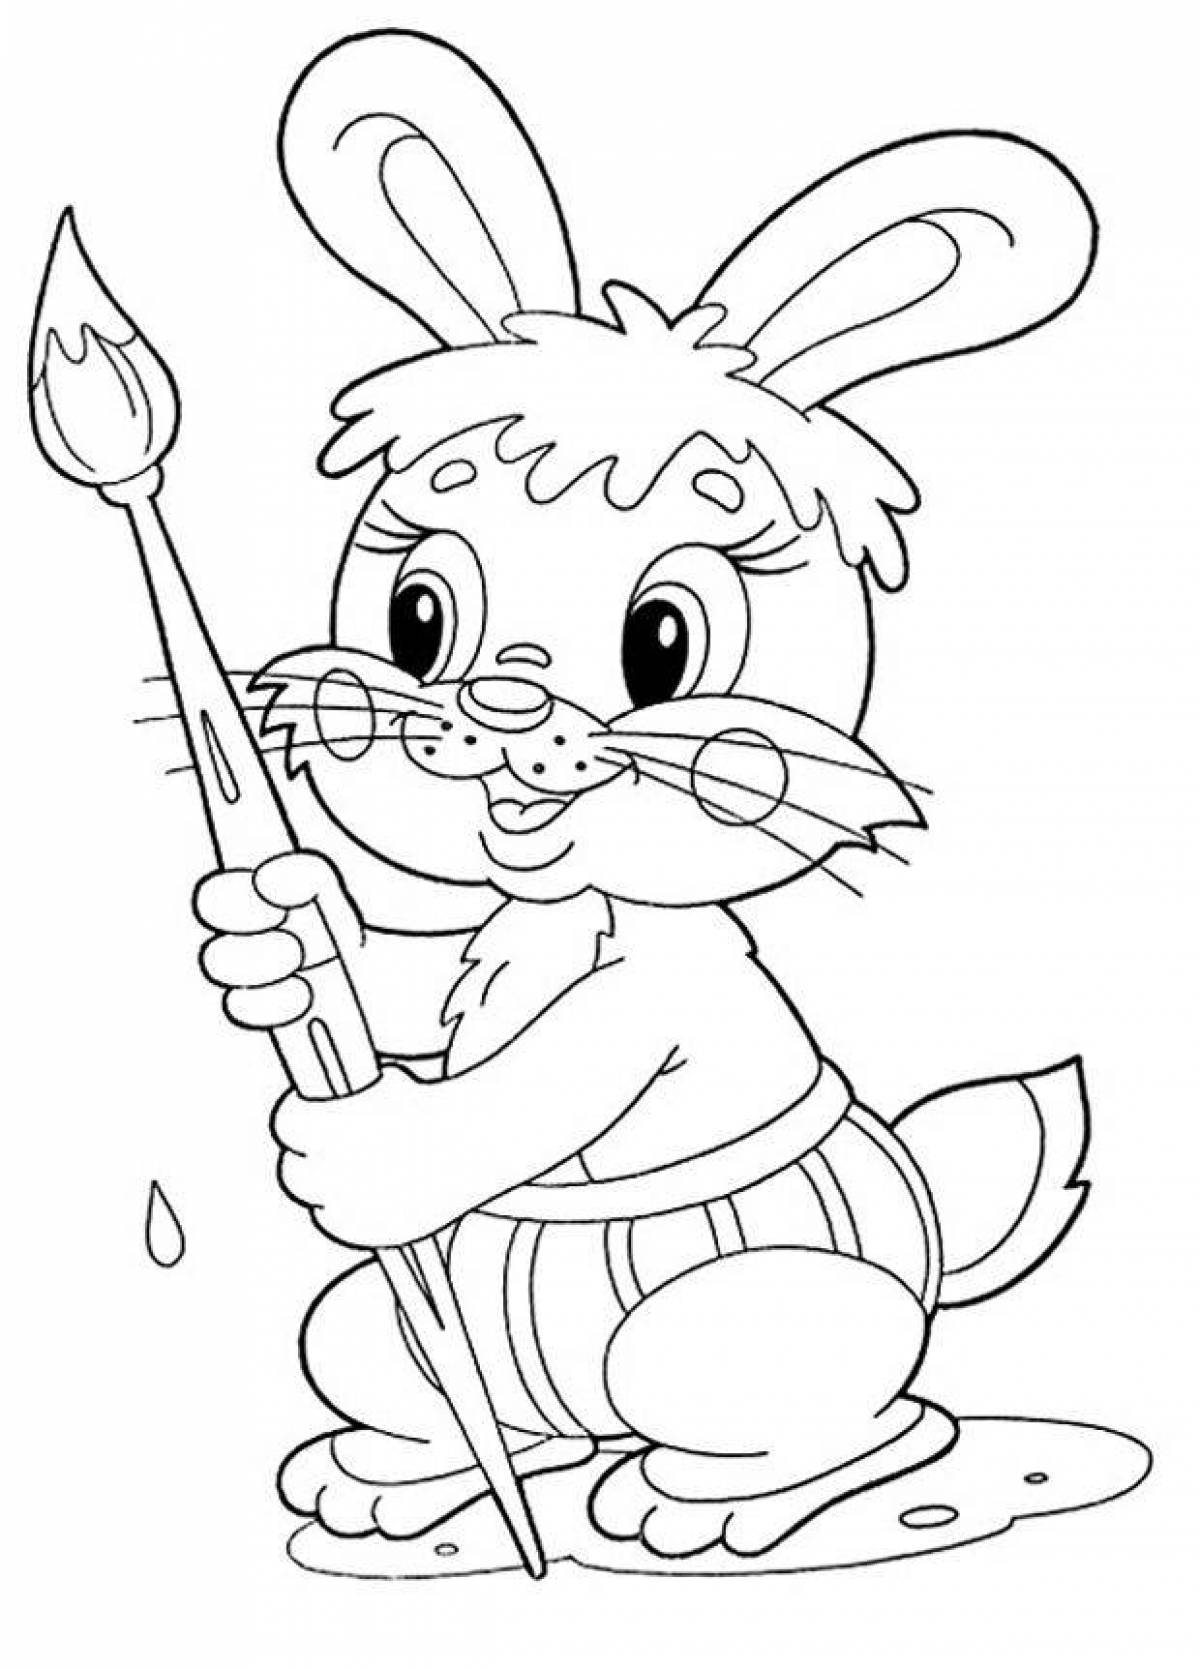 Whimsical rabbit coloring book for kids